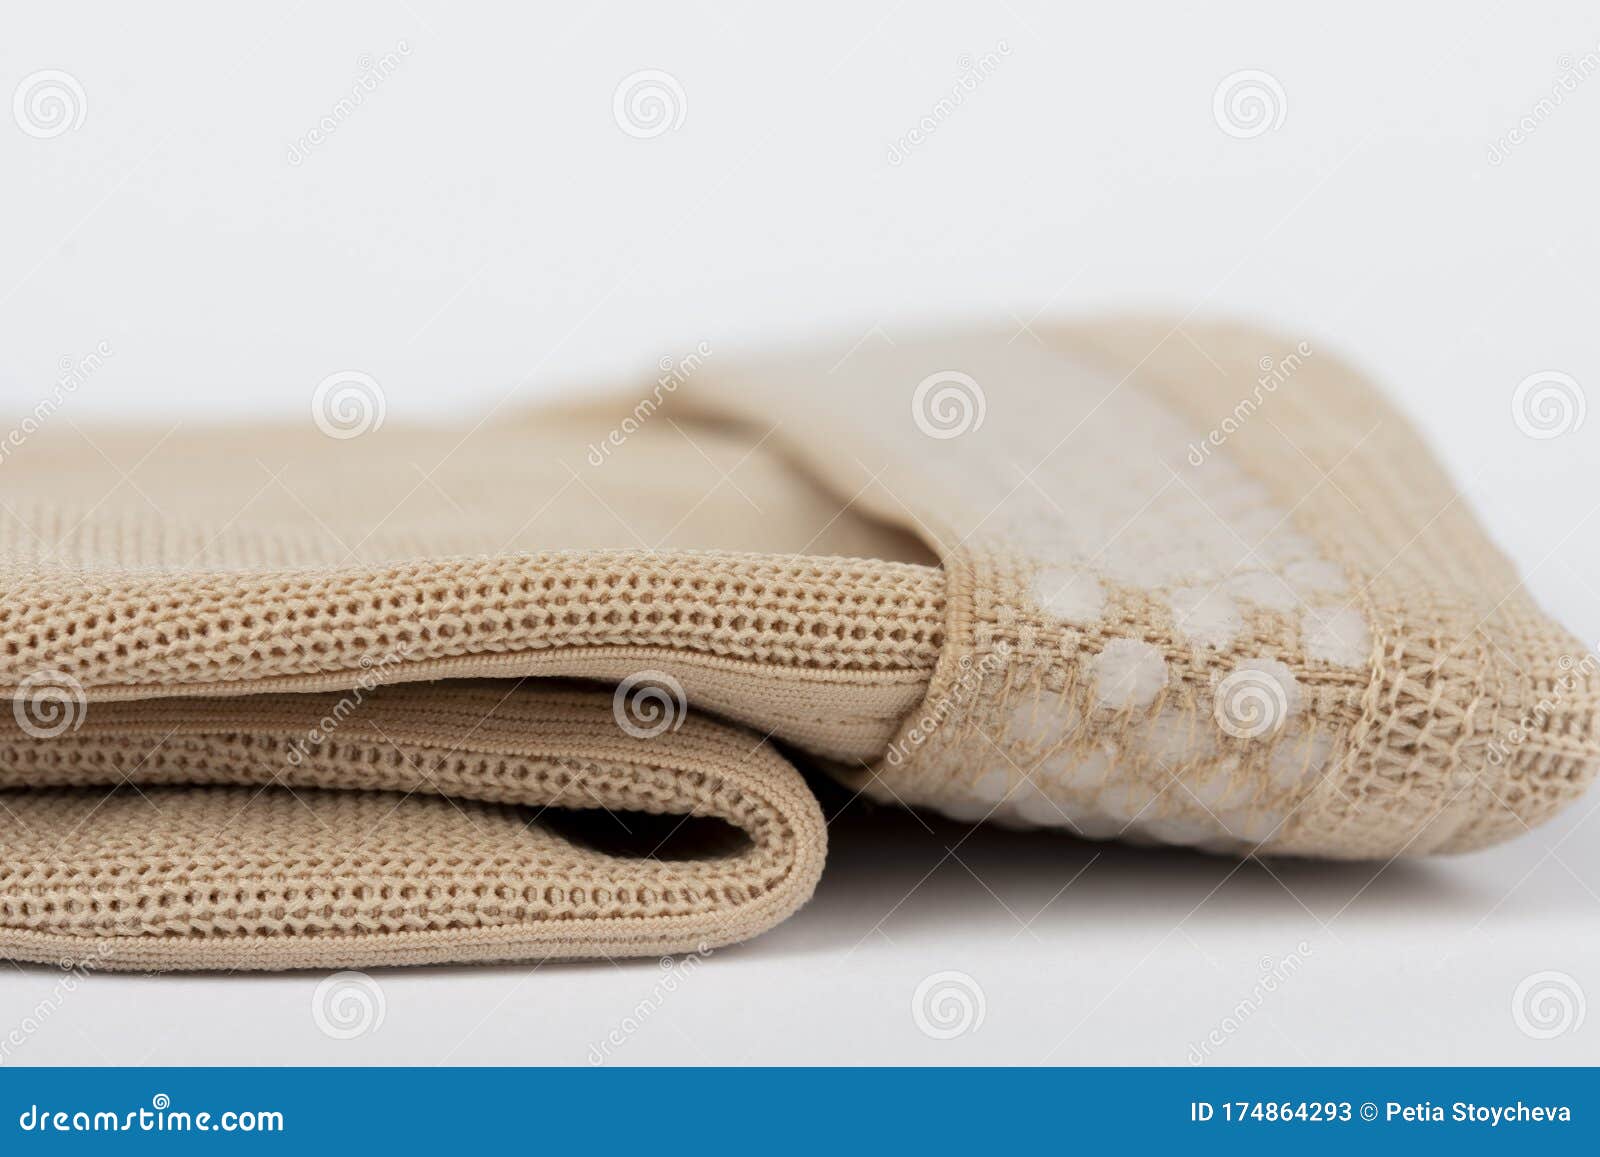 https://thumbs.dreamstime.com/z/close-up-flat-knit-graduated-compression-garments-leg-lymphedema-edema-lipedema-powerful-stocking-greater-containment-174864293.jpg